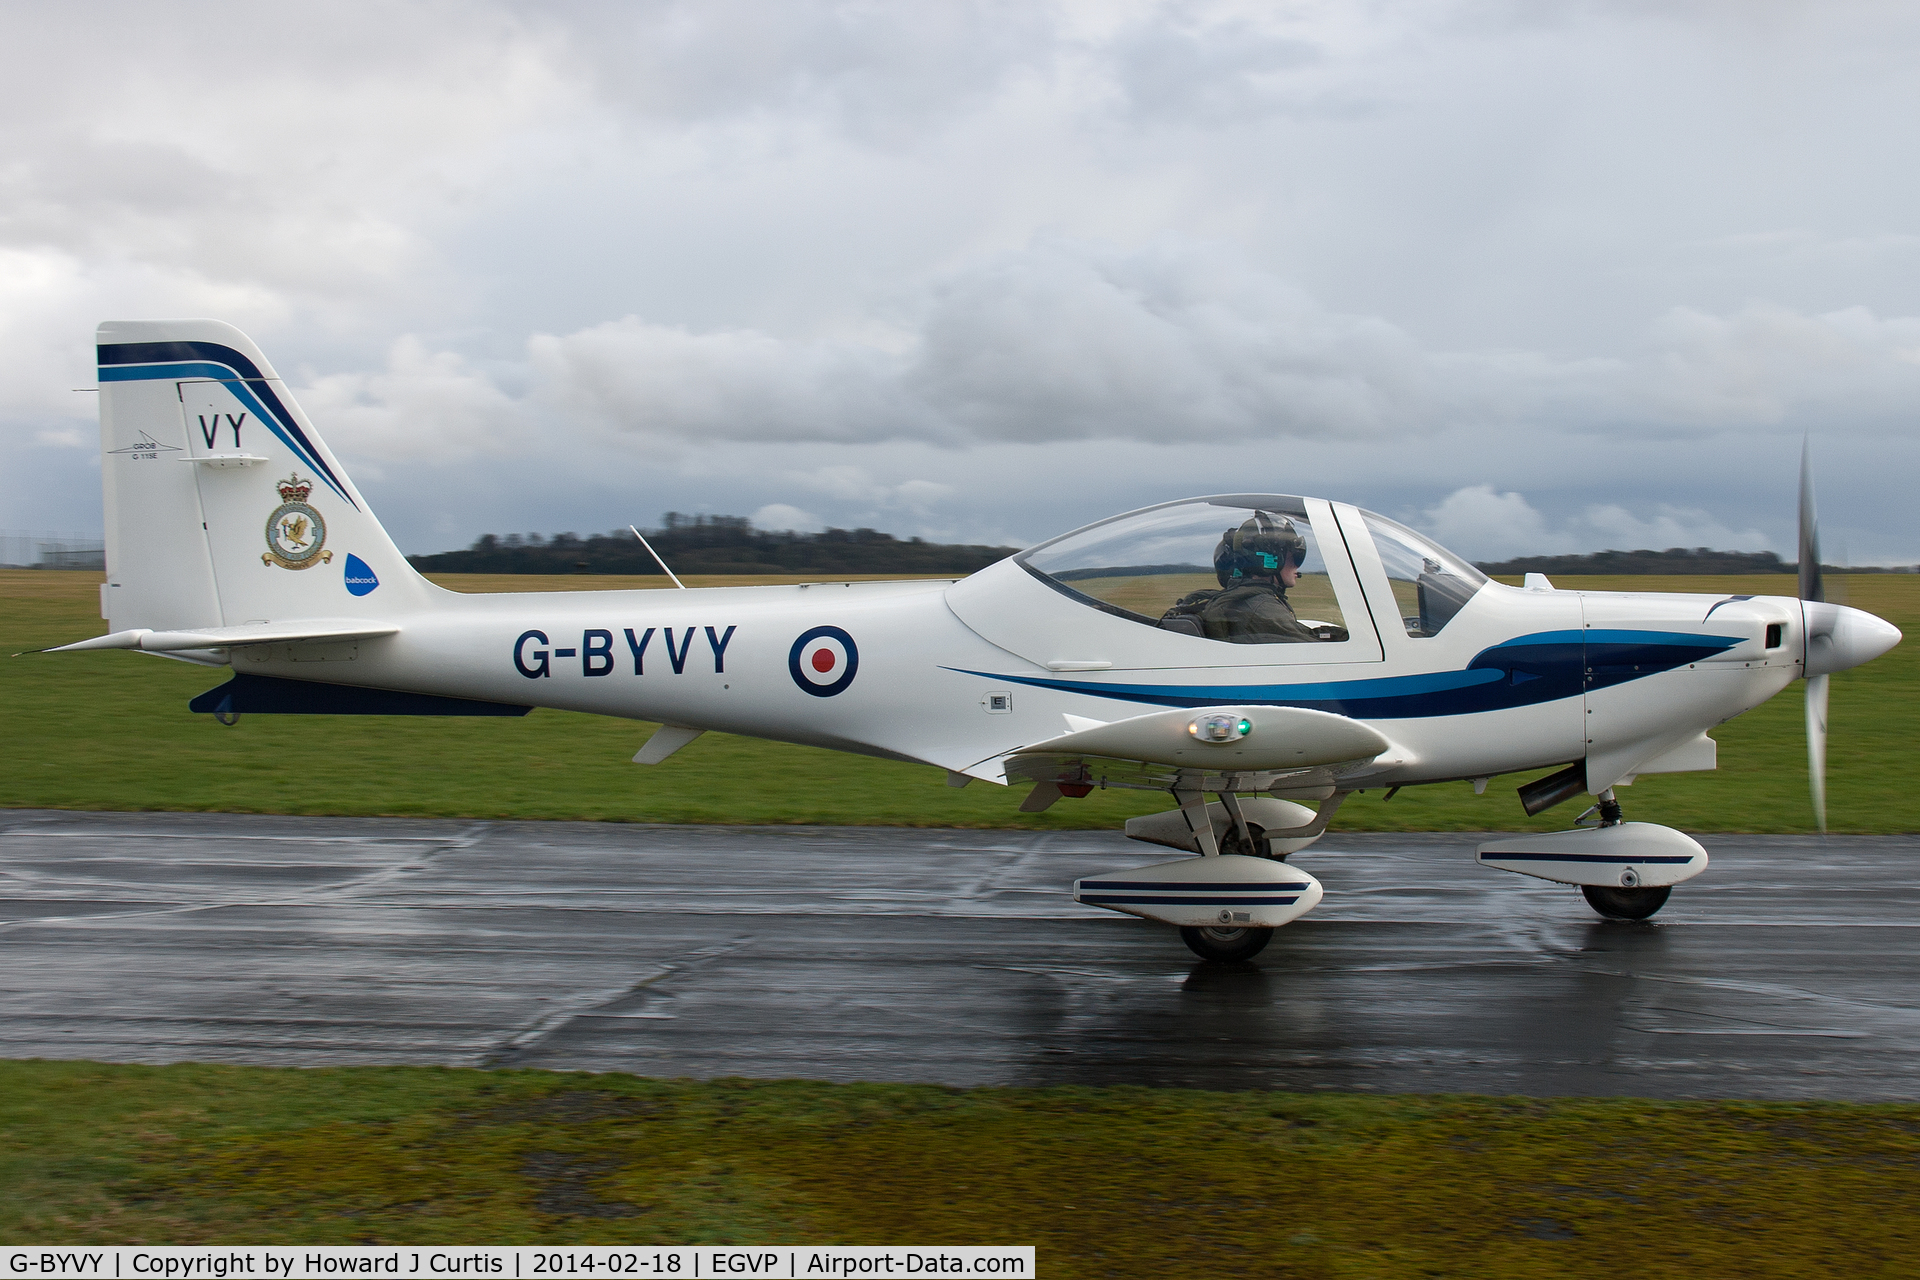 G-BYVY, 2000 Grob G-115E Tutor T1 C/N 82134/E, Tutor T1 G-BYVY is one of a small number used for basic training by No1 EFTS here.